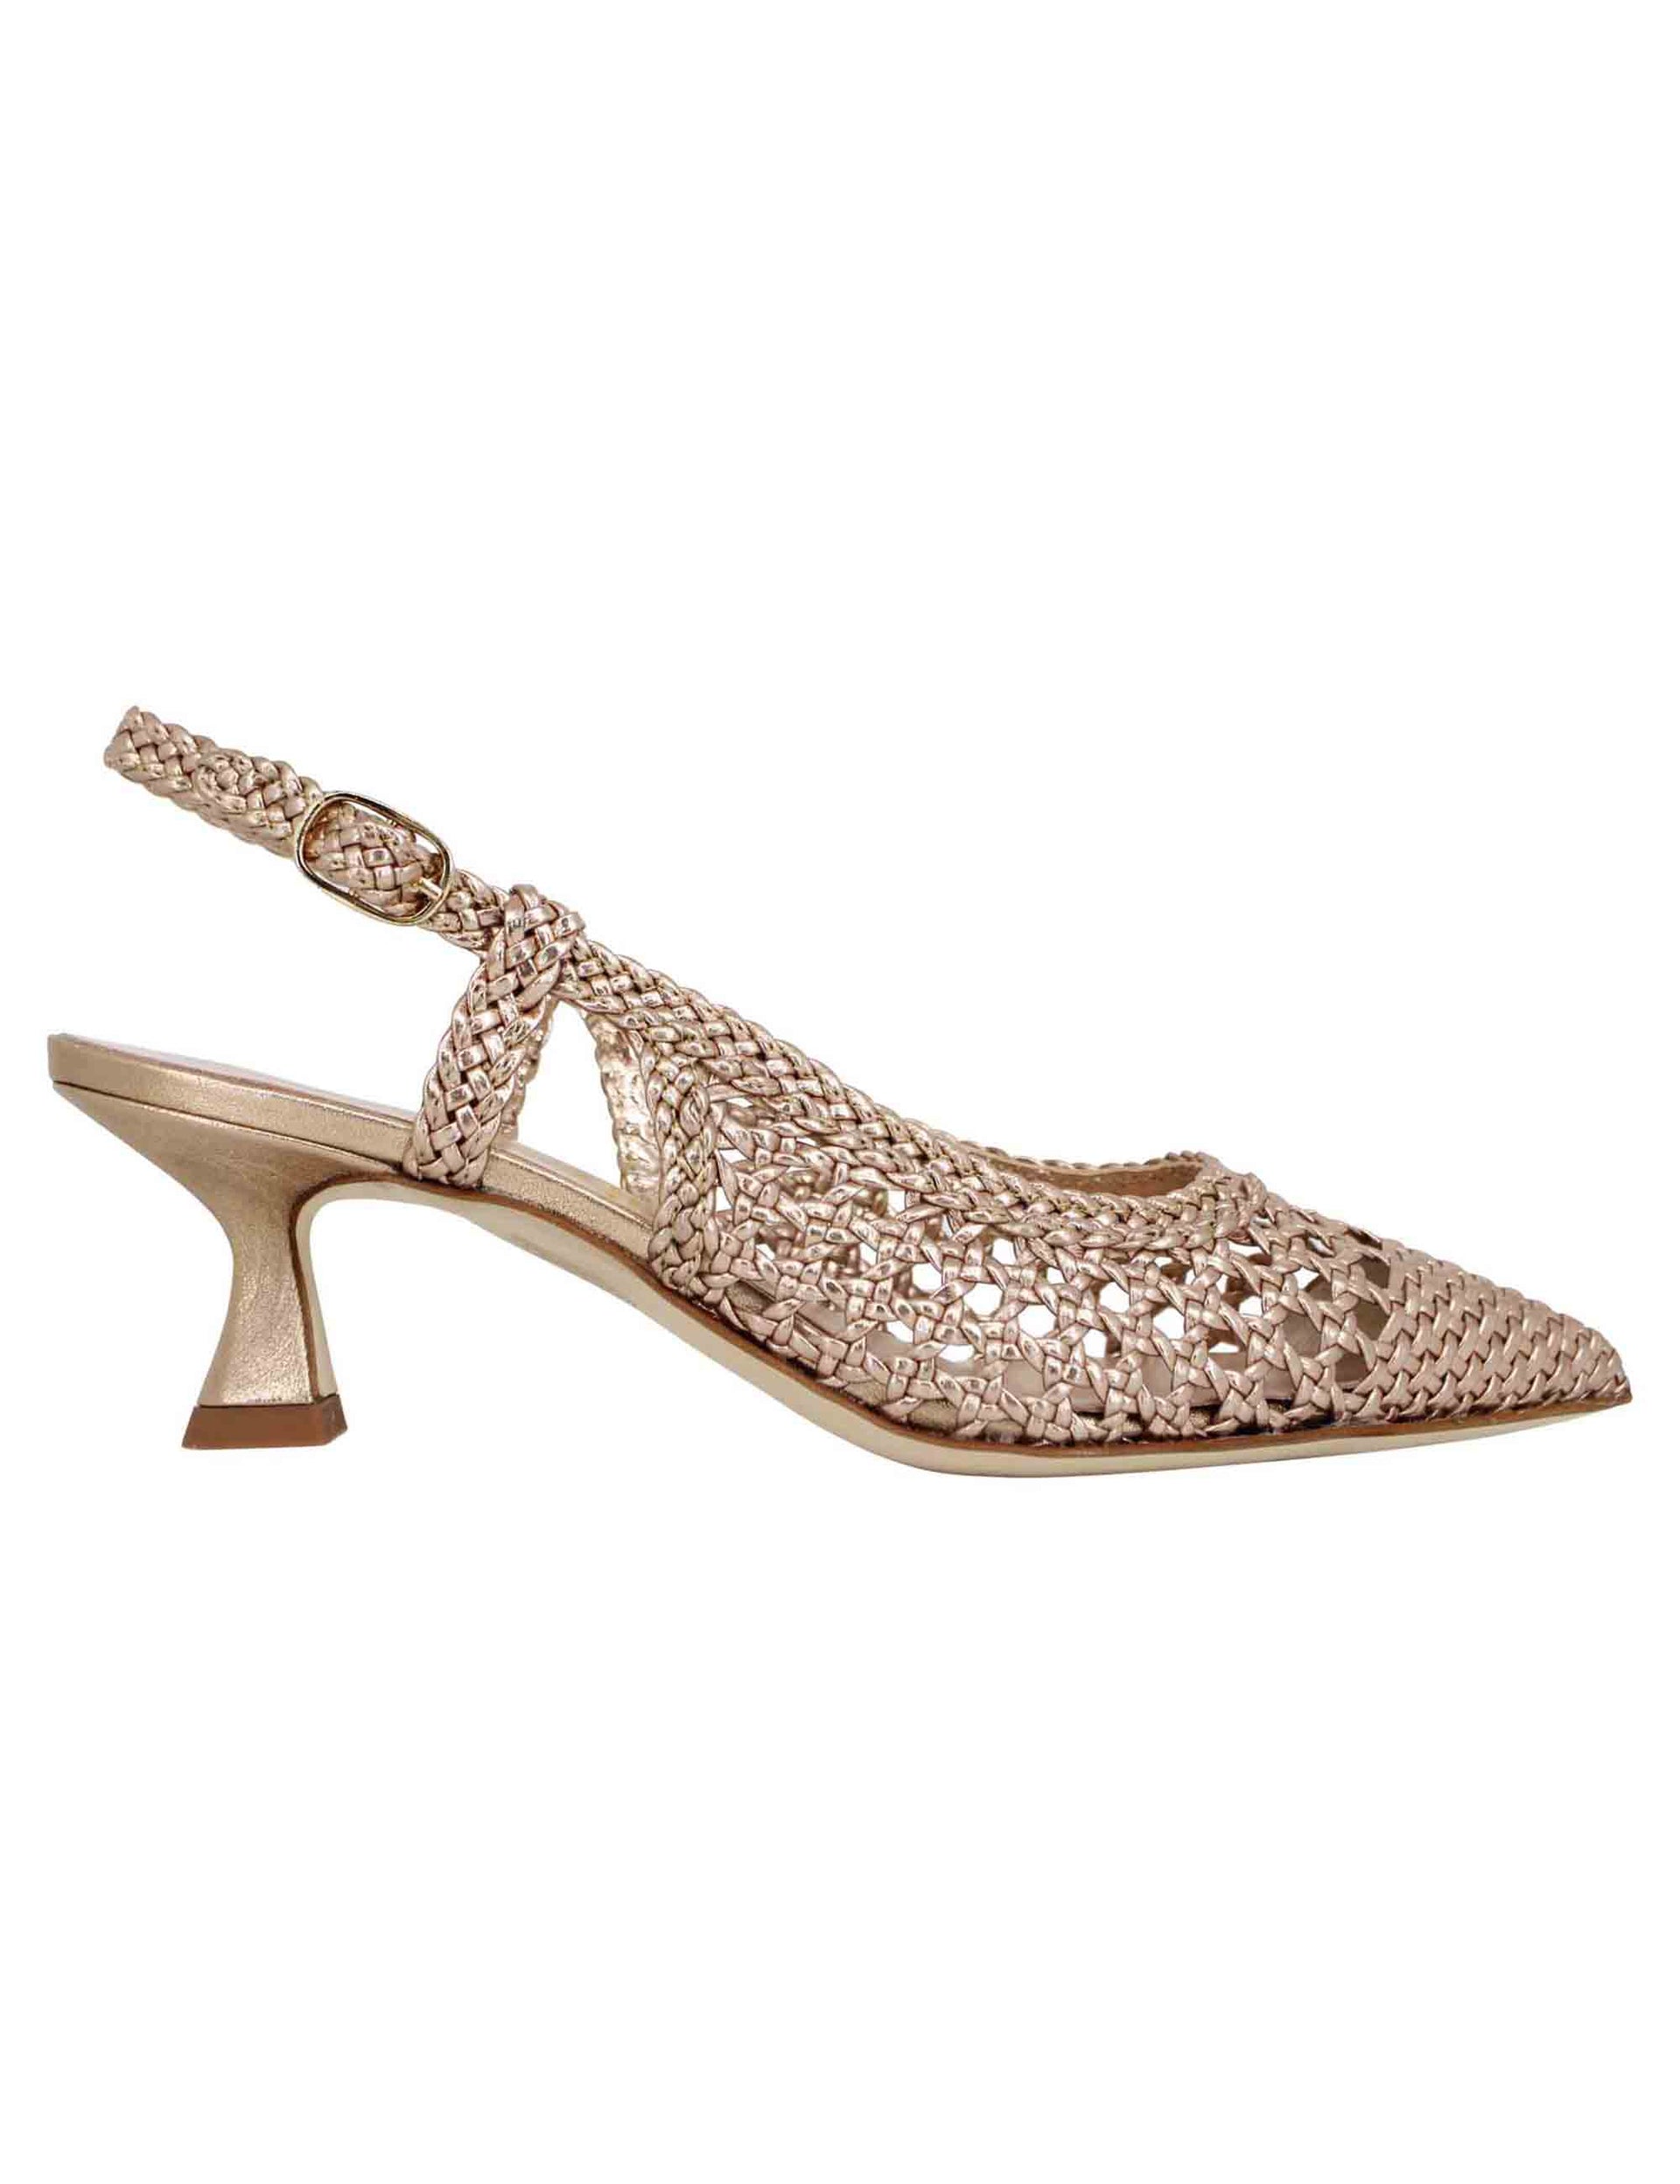 Women's slingback pumps in gold laminated woven leather with matching heel